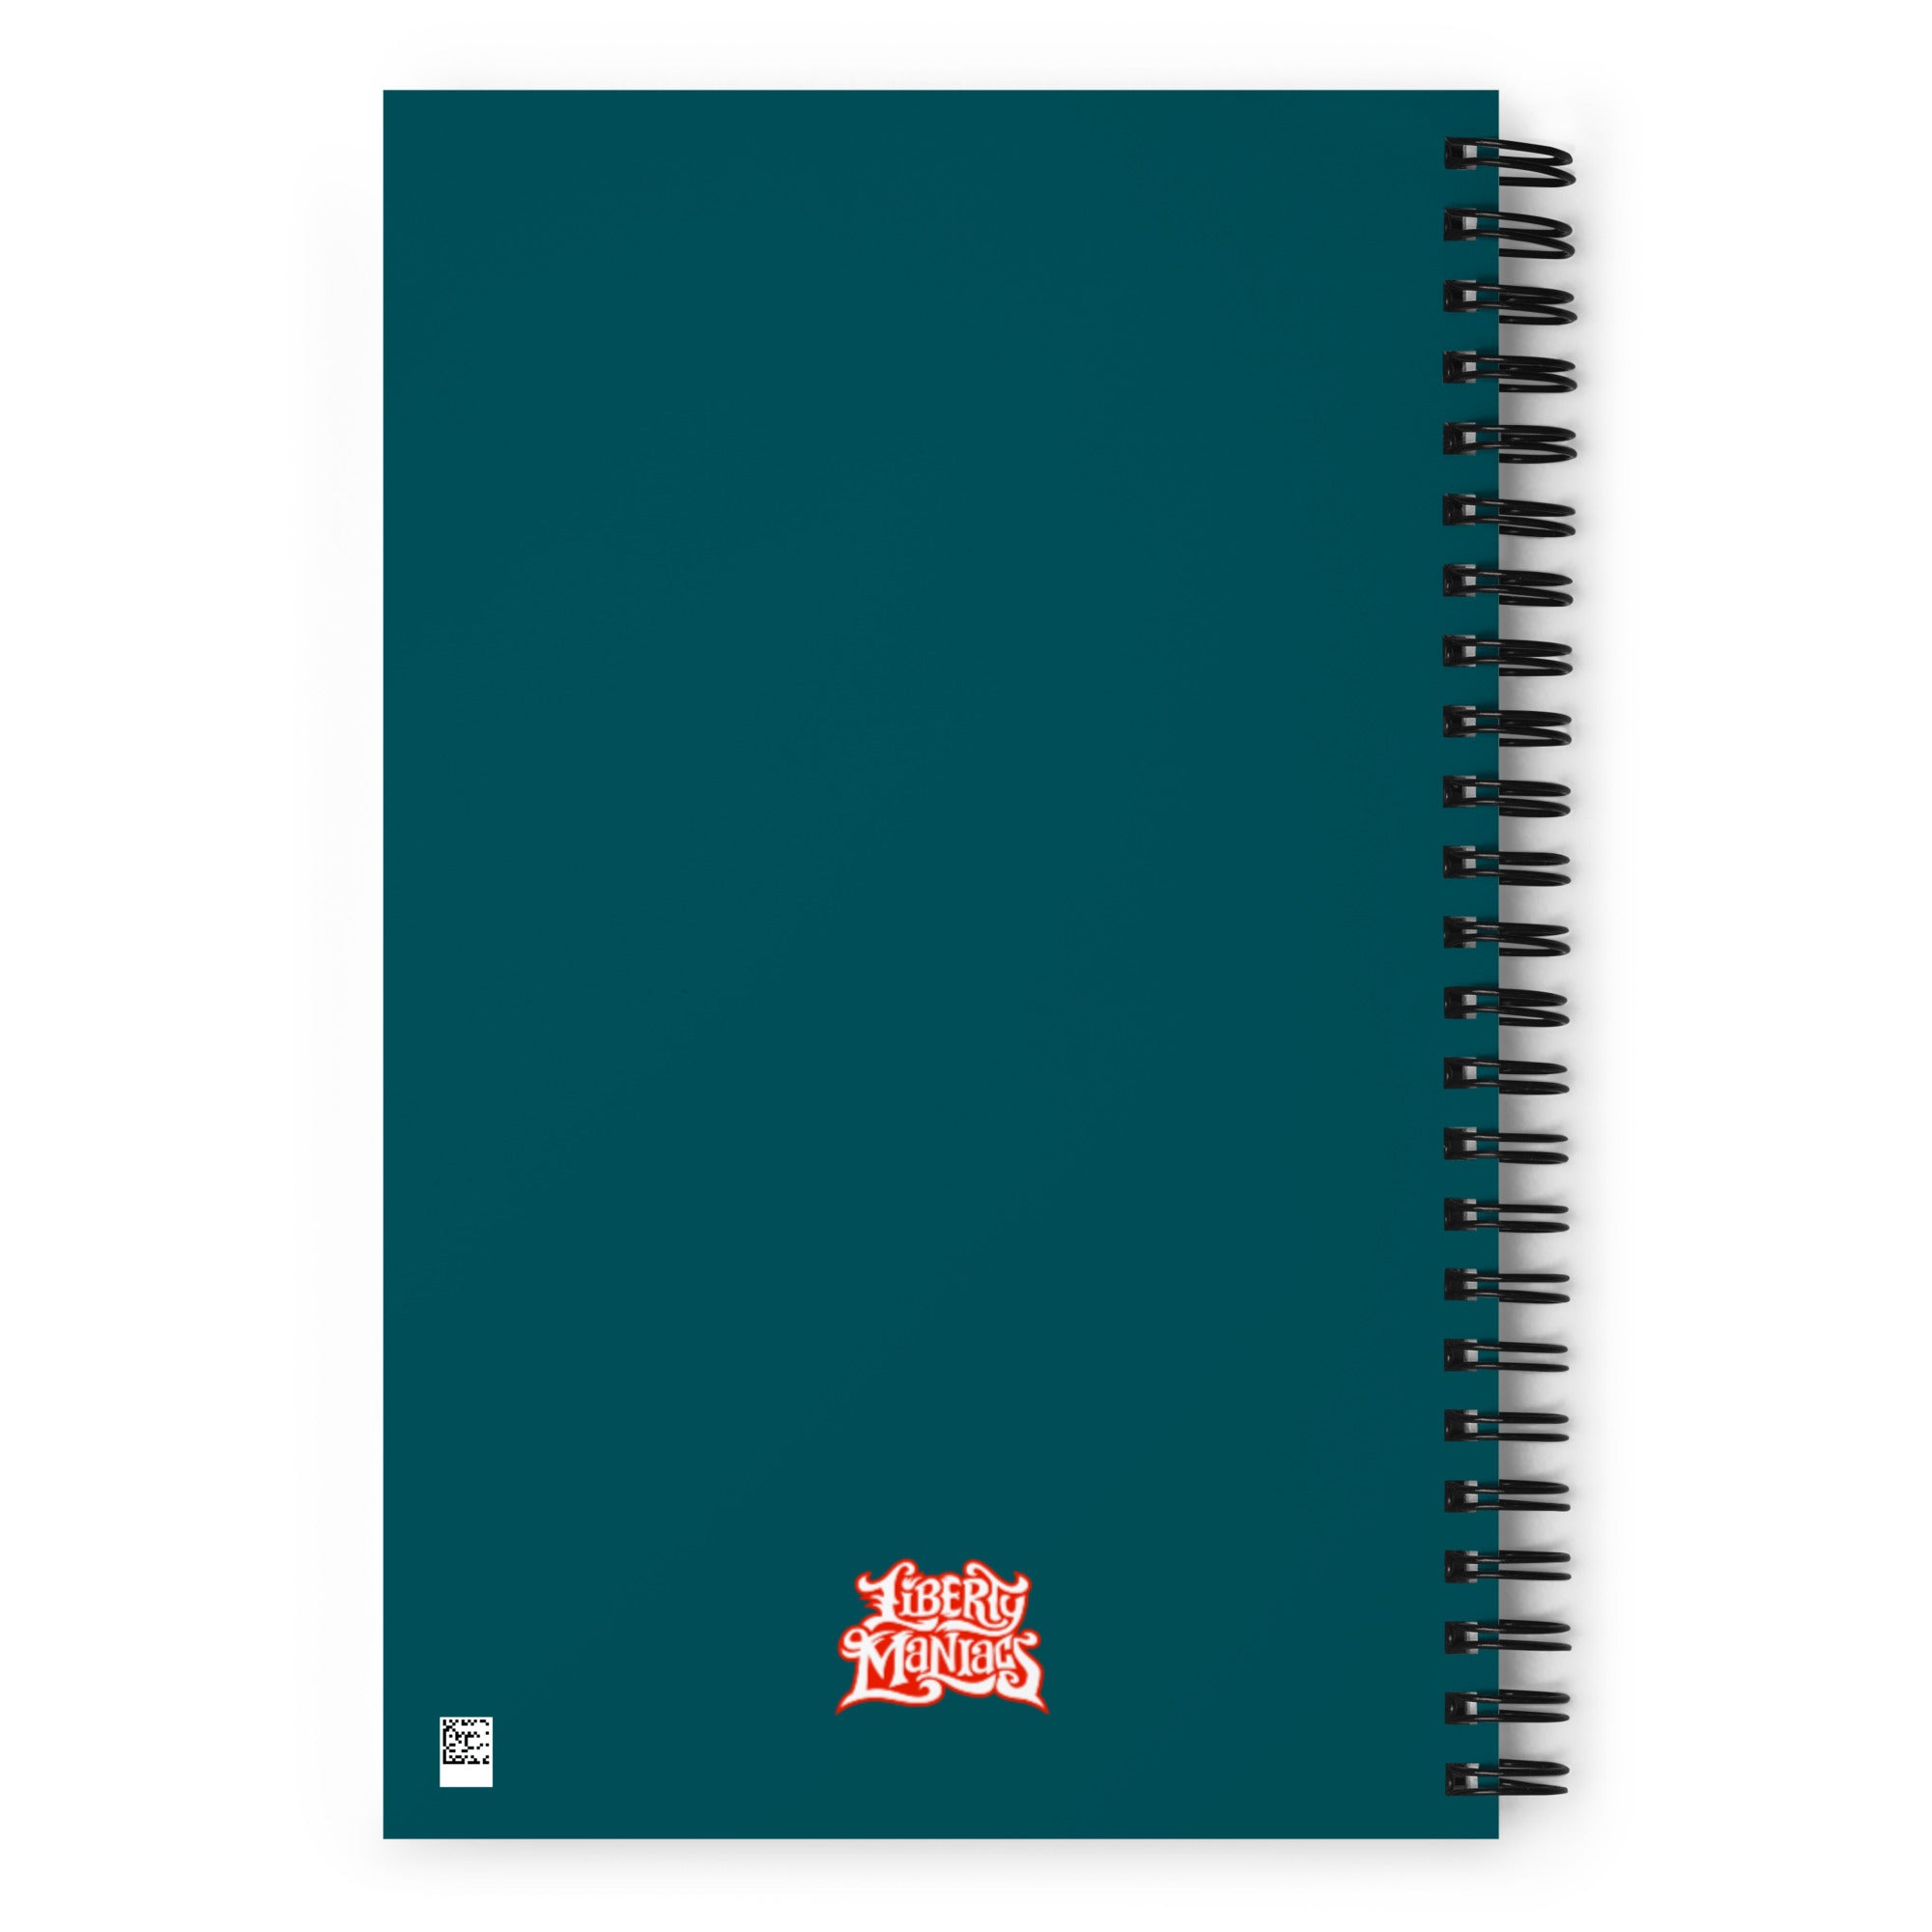 Let's Destroy the World With Social Media Spiral Notebook